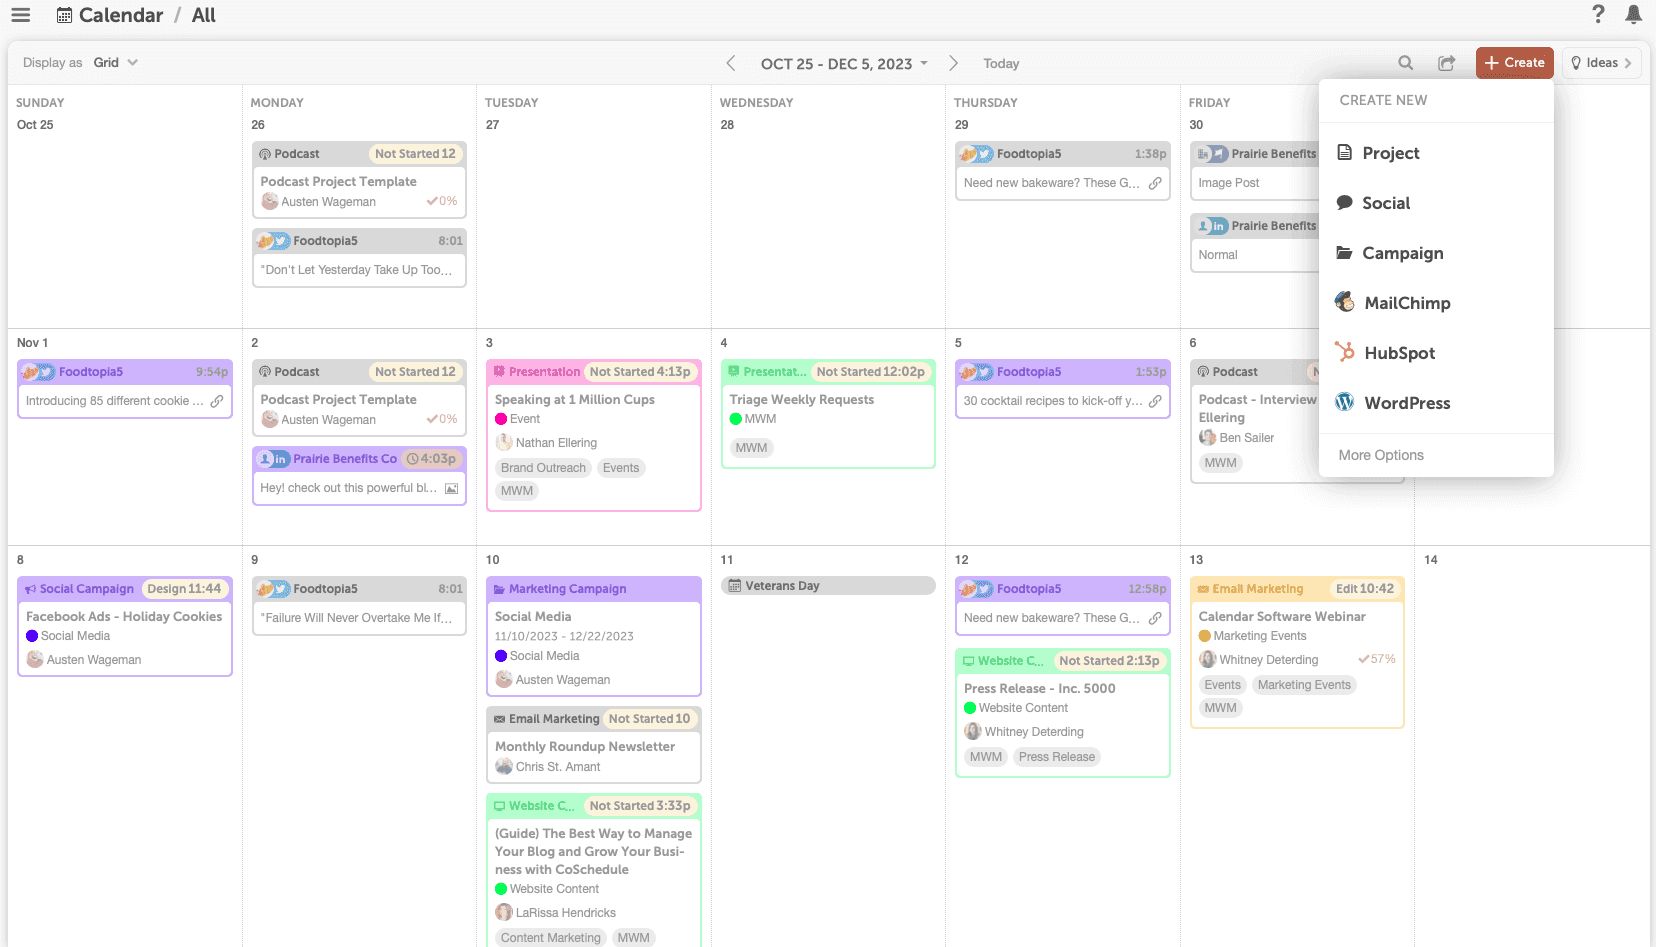 Showing how to create a new project in the Marketing Calendar